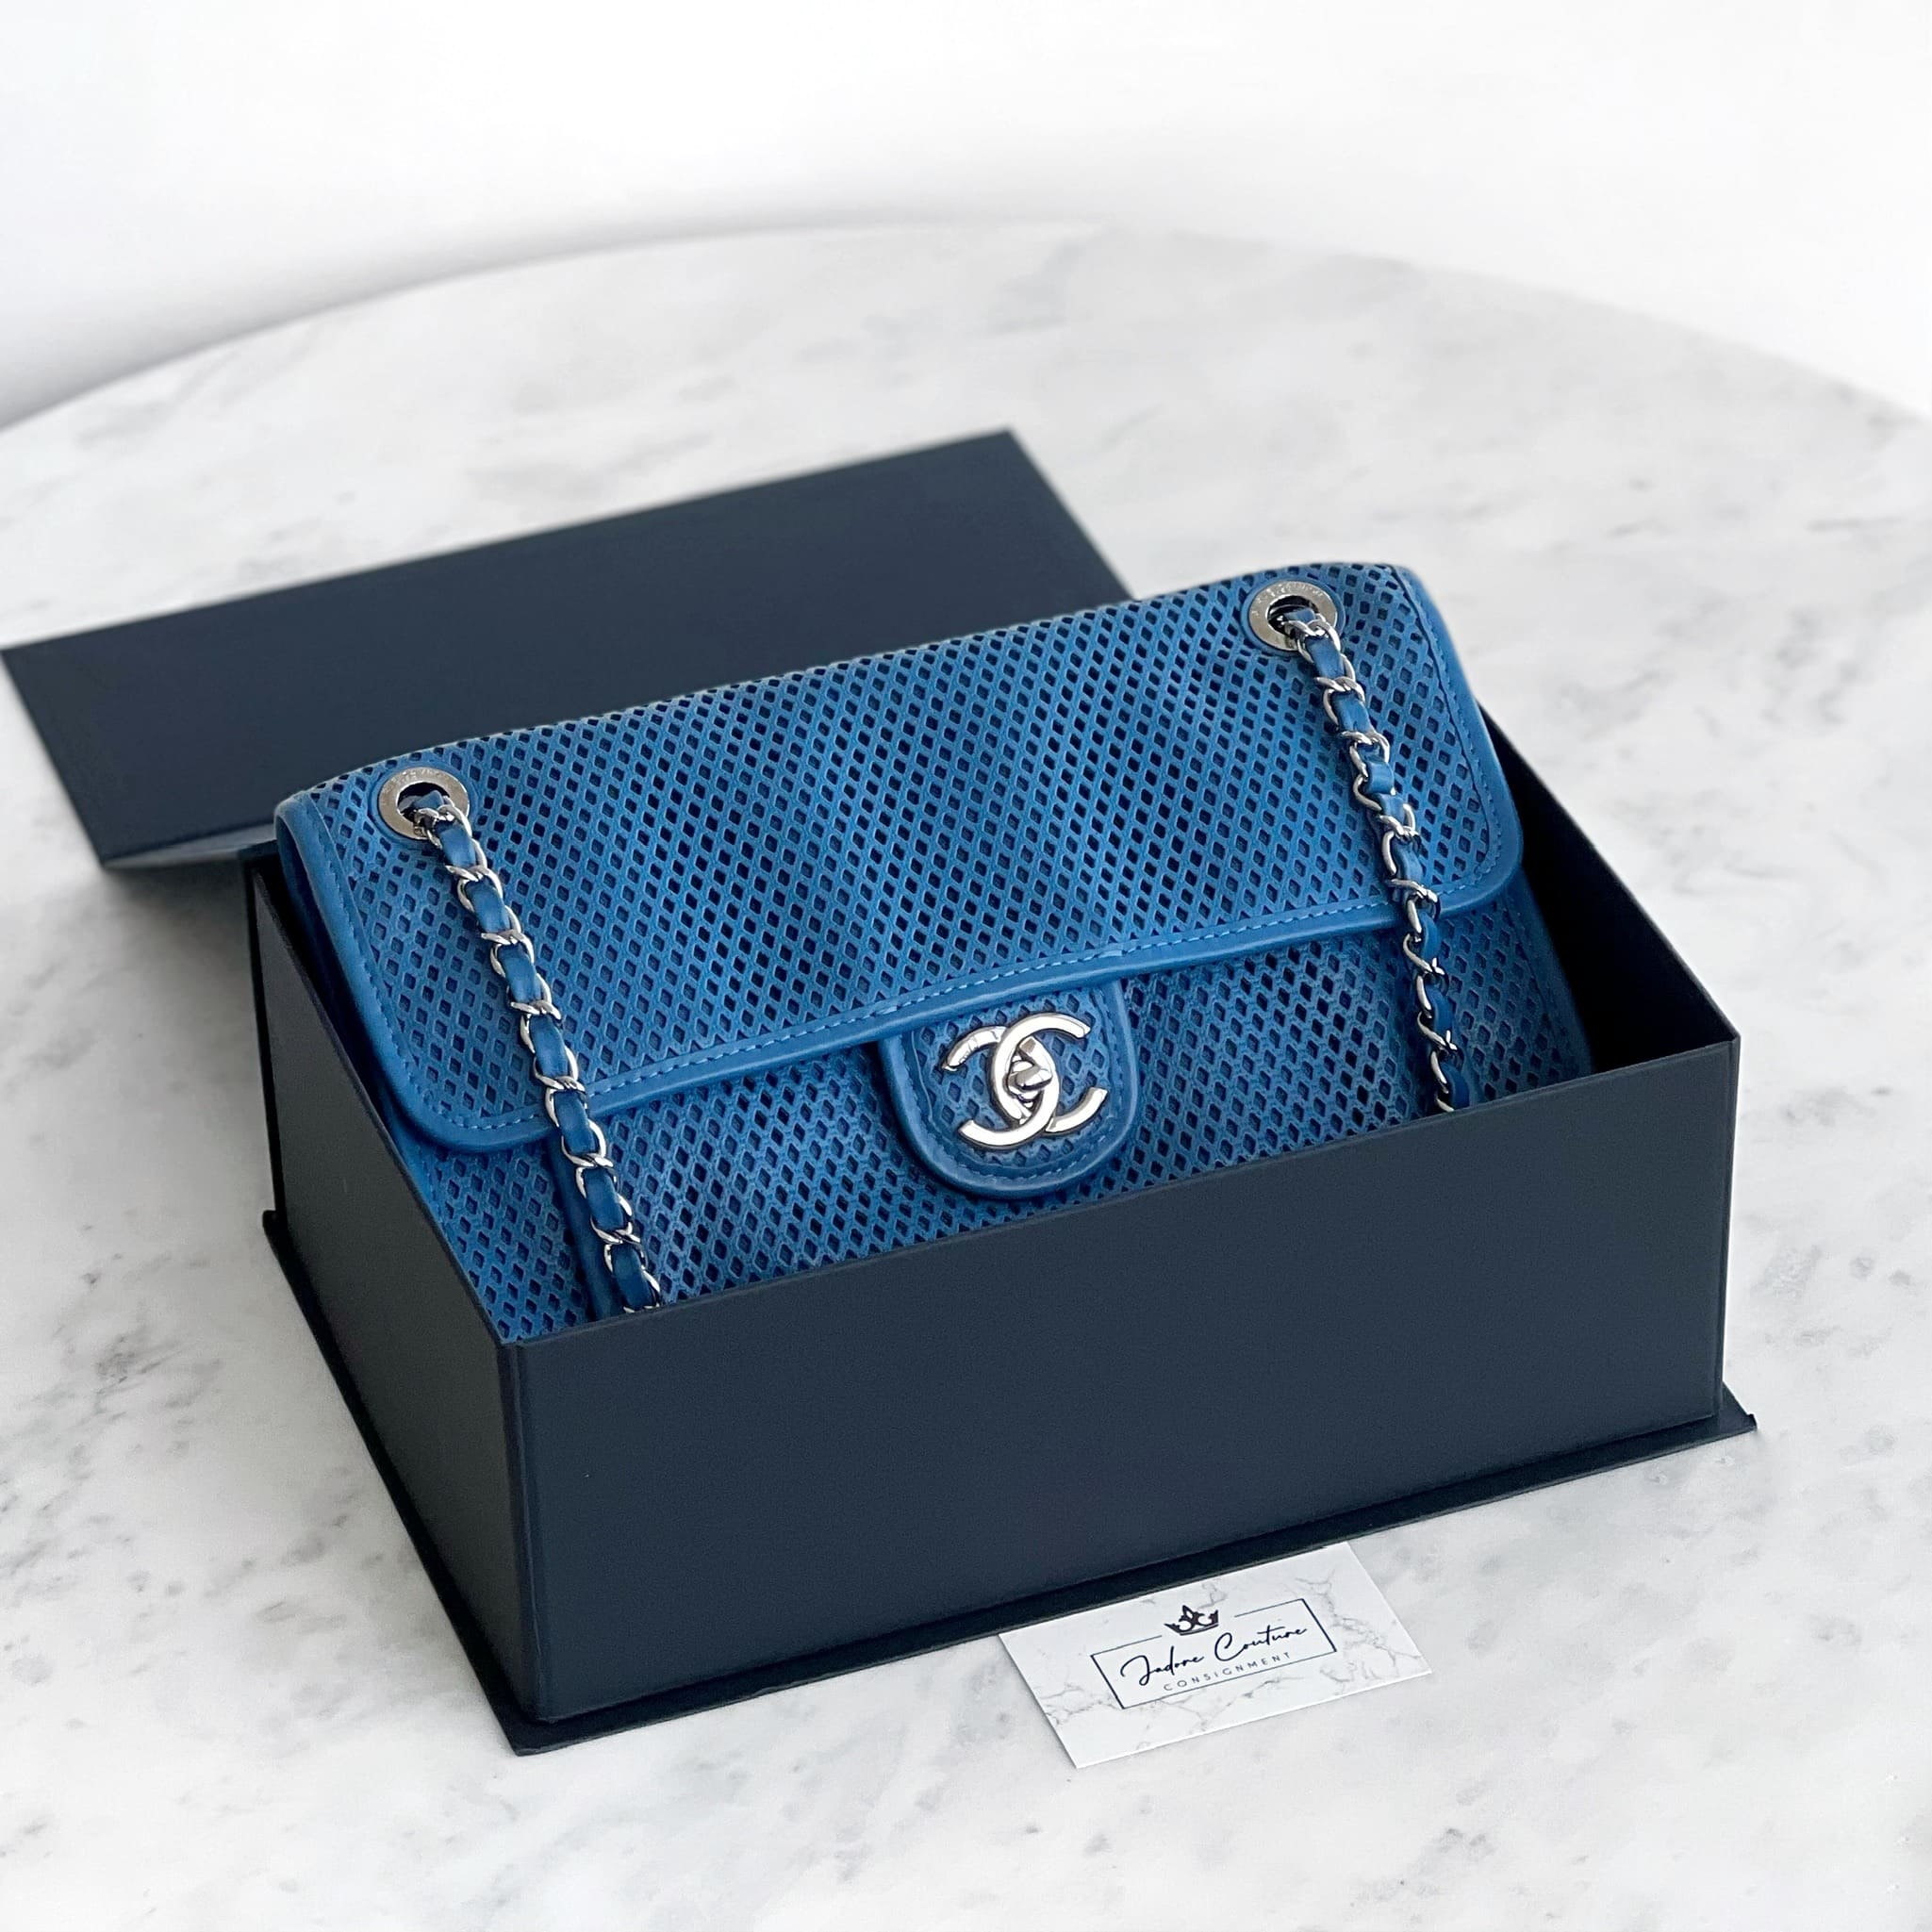 Chanel Blue Perforated French Riviera Flap Bag